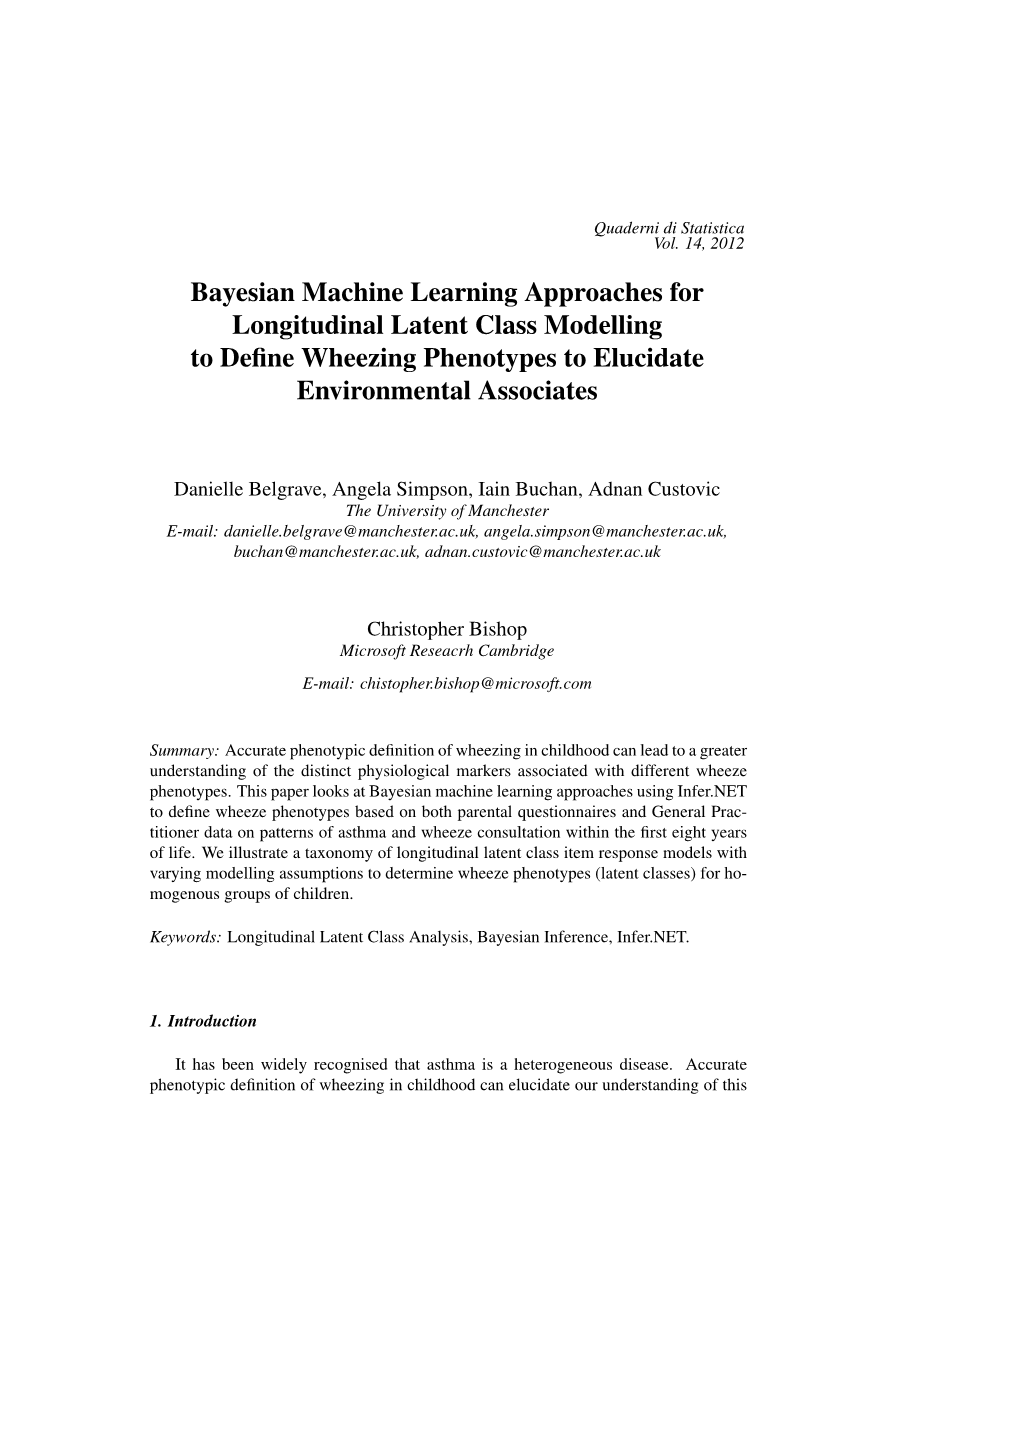 Bayesian Machine Learning Approaches for Longitudinal Latent Class Modelling to Deﬁne Wheezing Phenotypes to Elucidate Environmental Associates